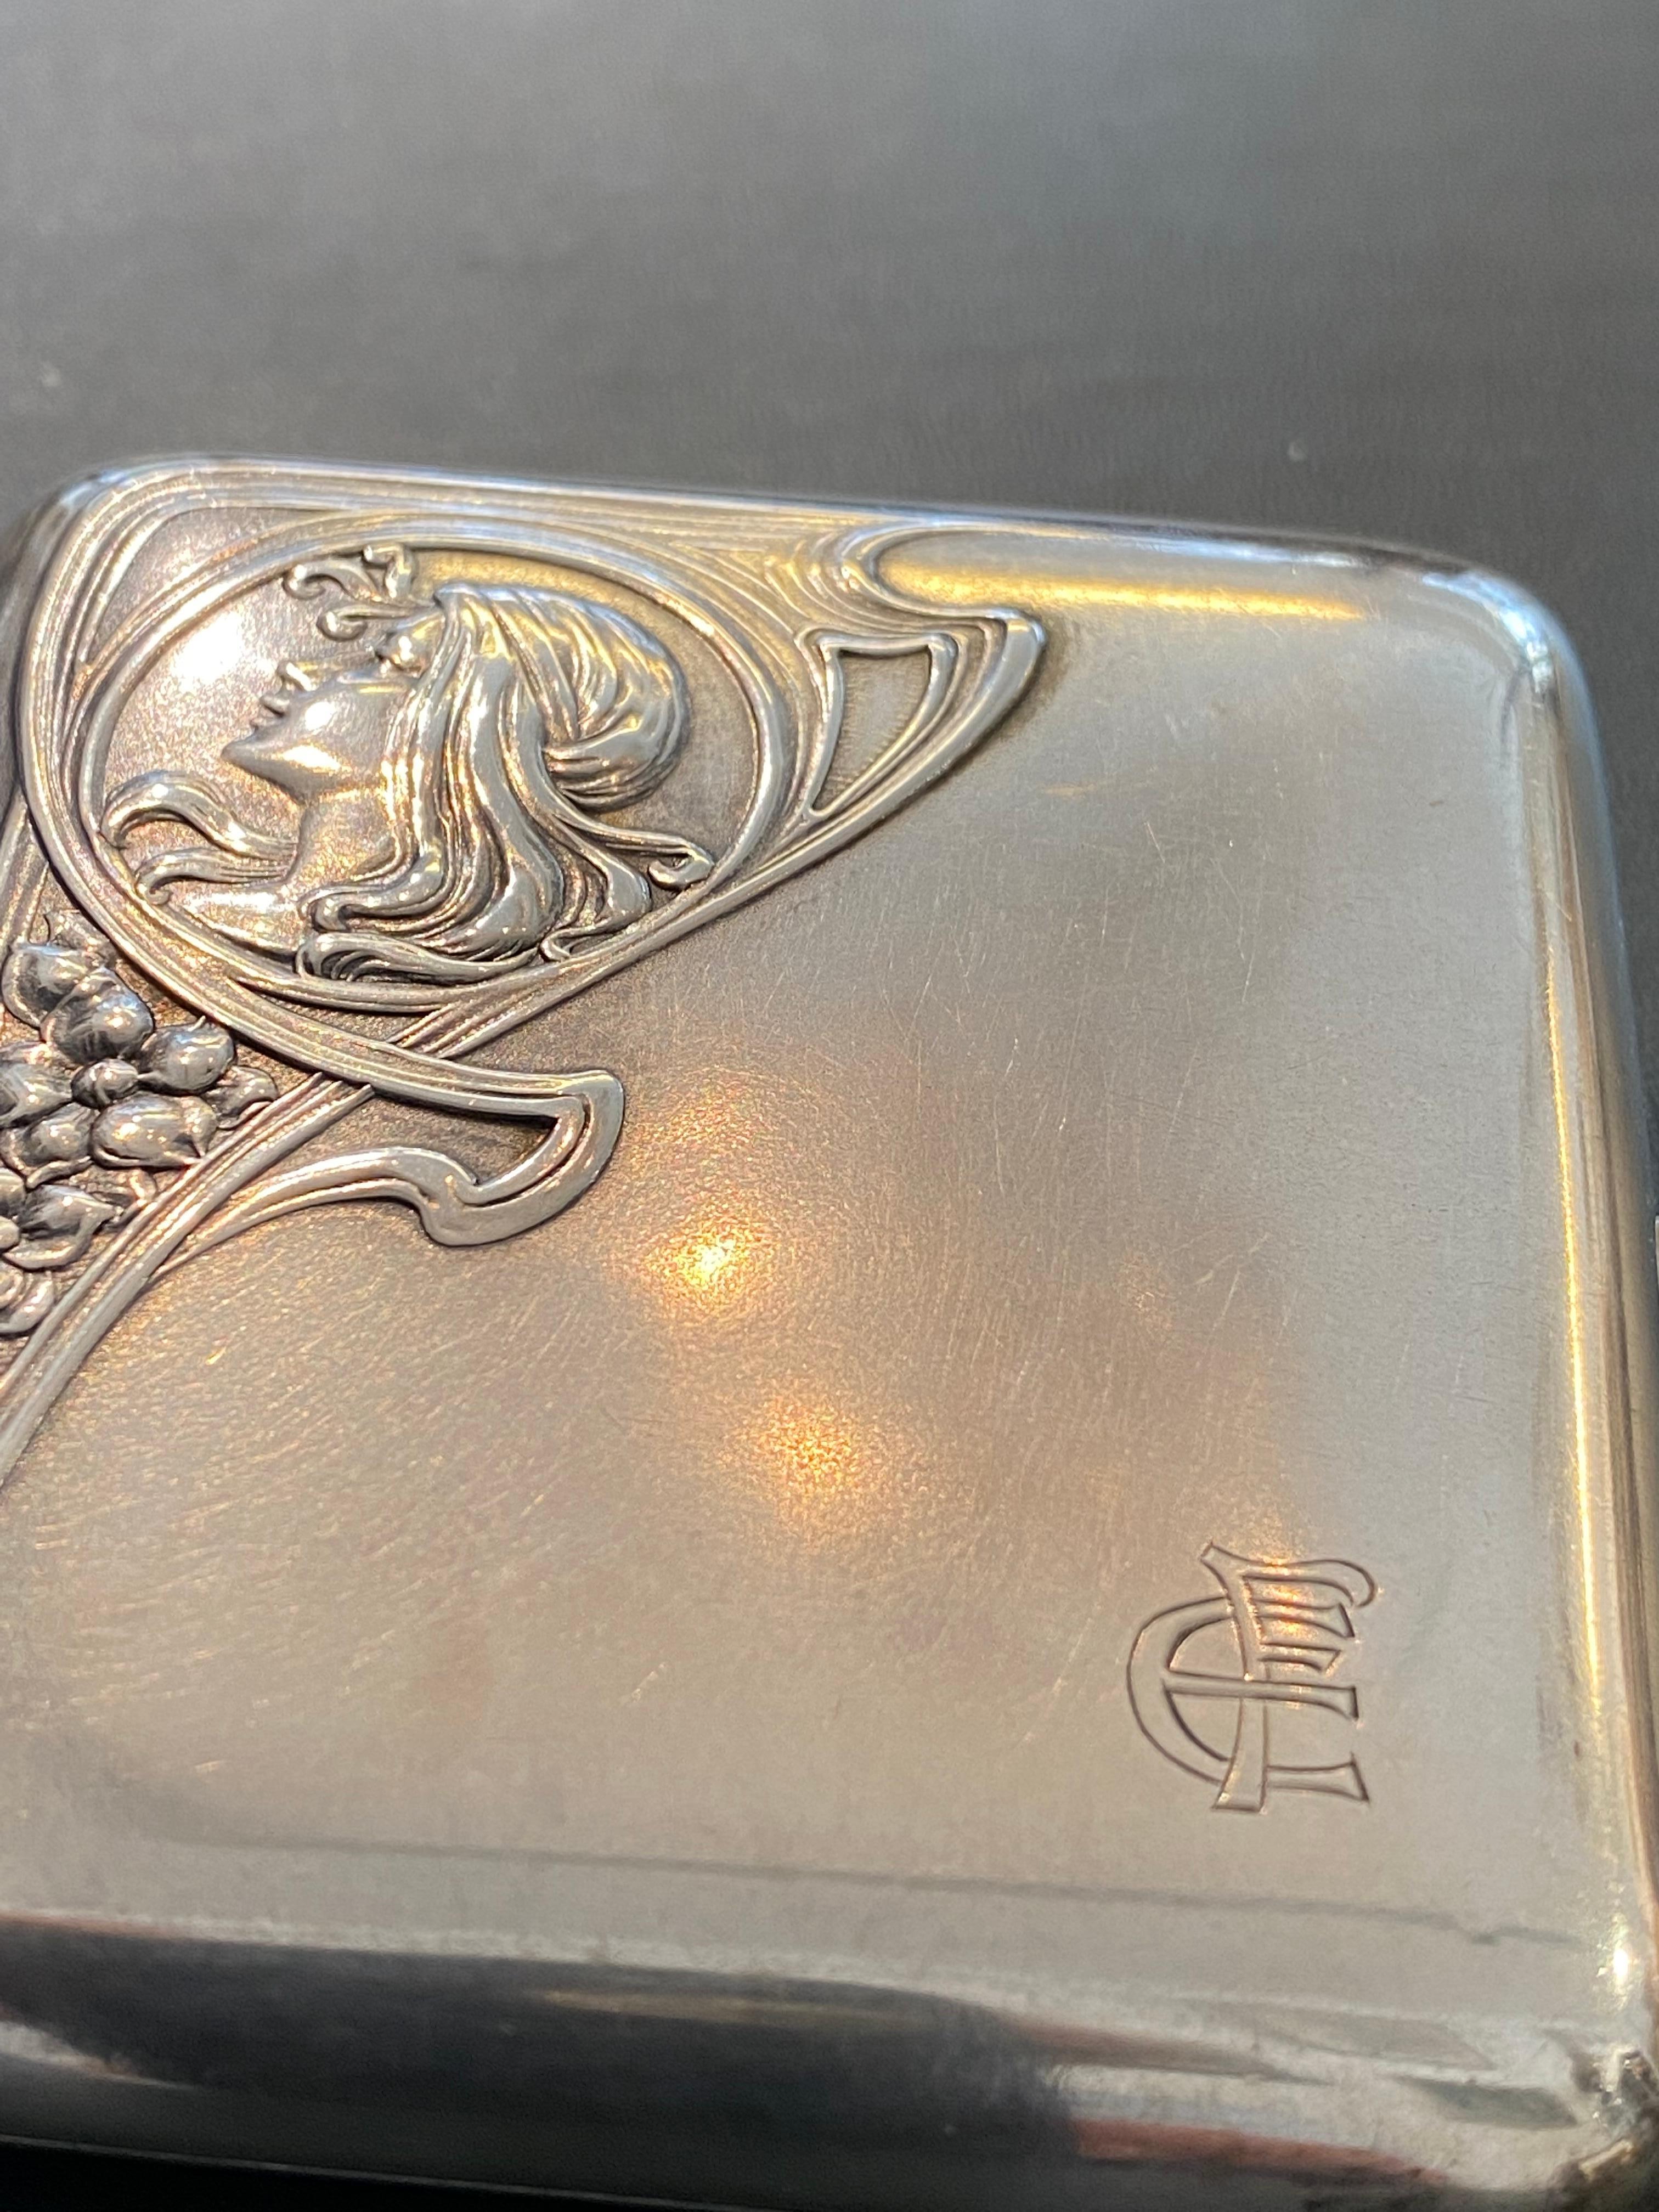 Nice and well preserved cigarette box, showing a young Lady‘s head on the frontside. Hallmarked with the Crown and Moon stamp and made of 800/1000 Fine Silver. Closes fine and smooth and holds. No dongs or bad scratches.
The ribbons ti hold the